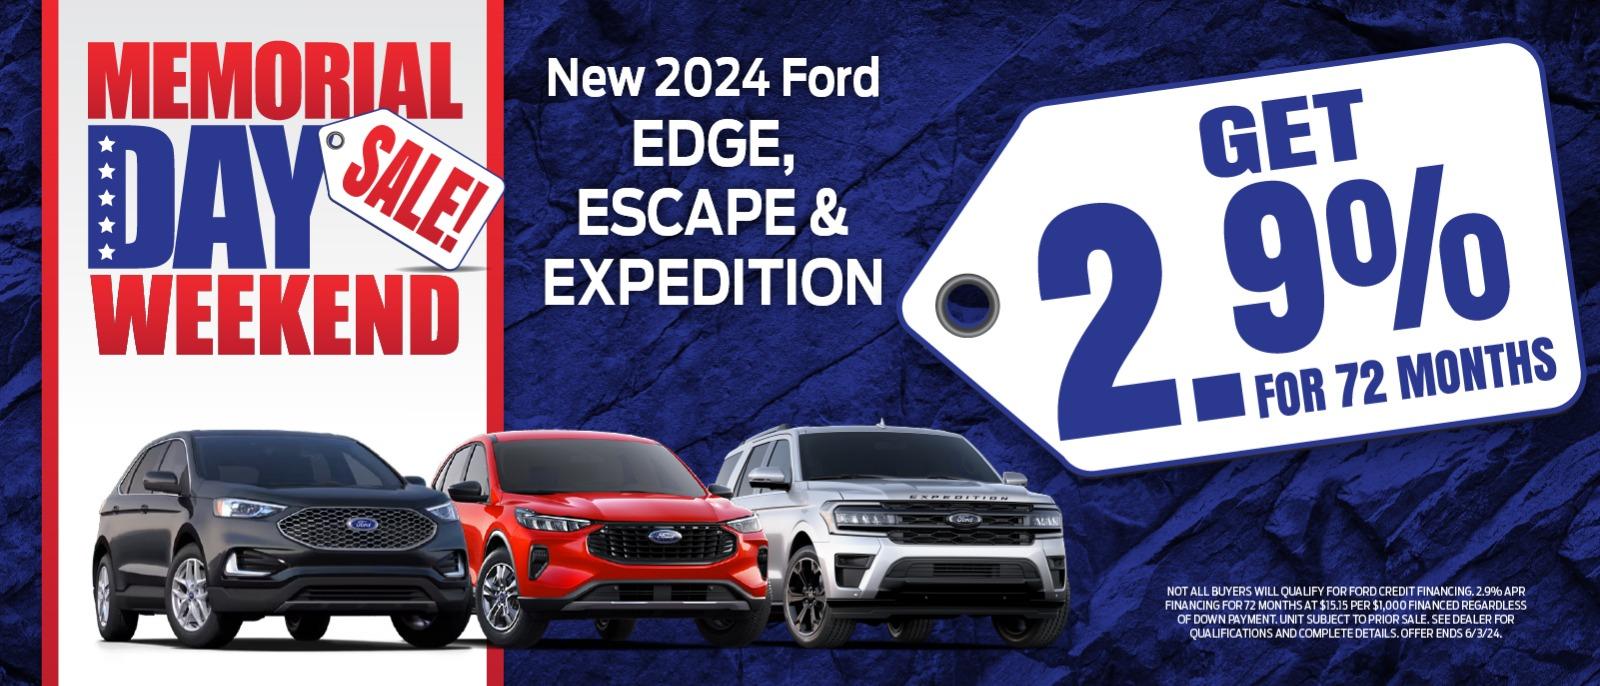 ⭐Memorial Day Sale Edge , Escape and Expedition 2.9% for 72 Months Special!⭐